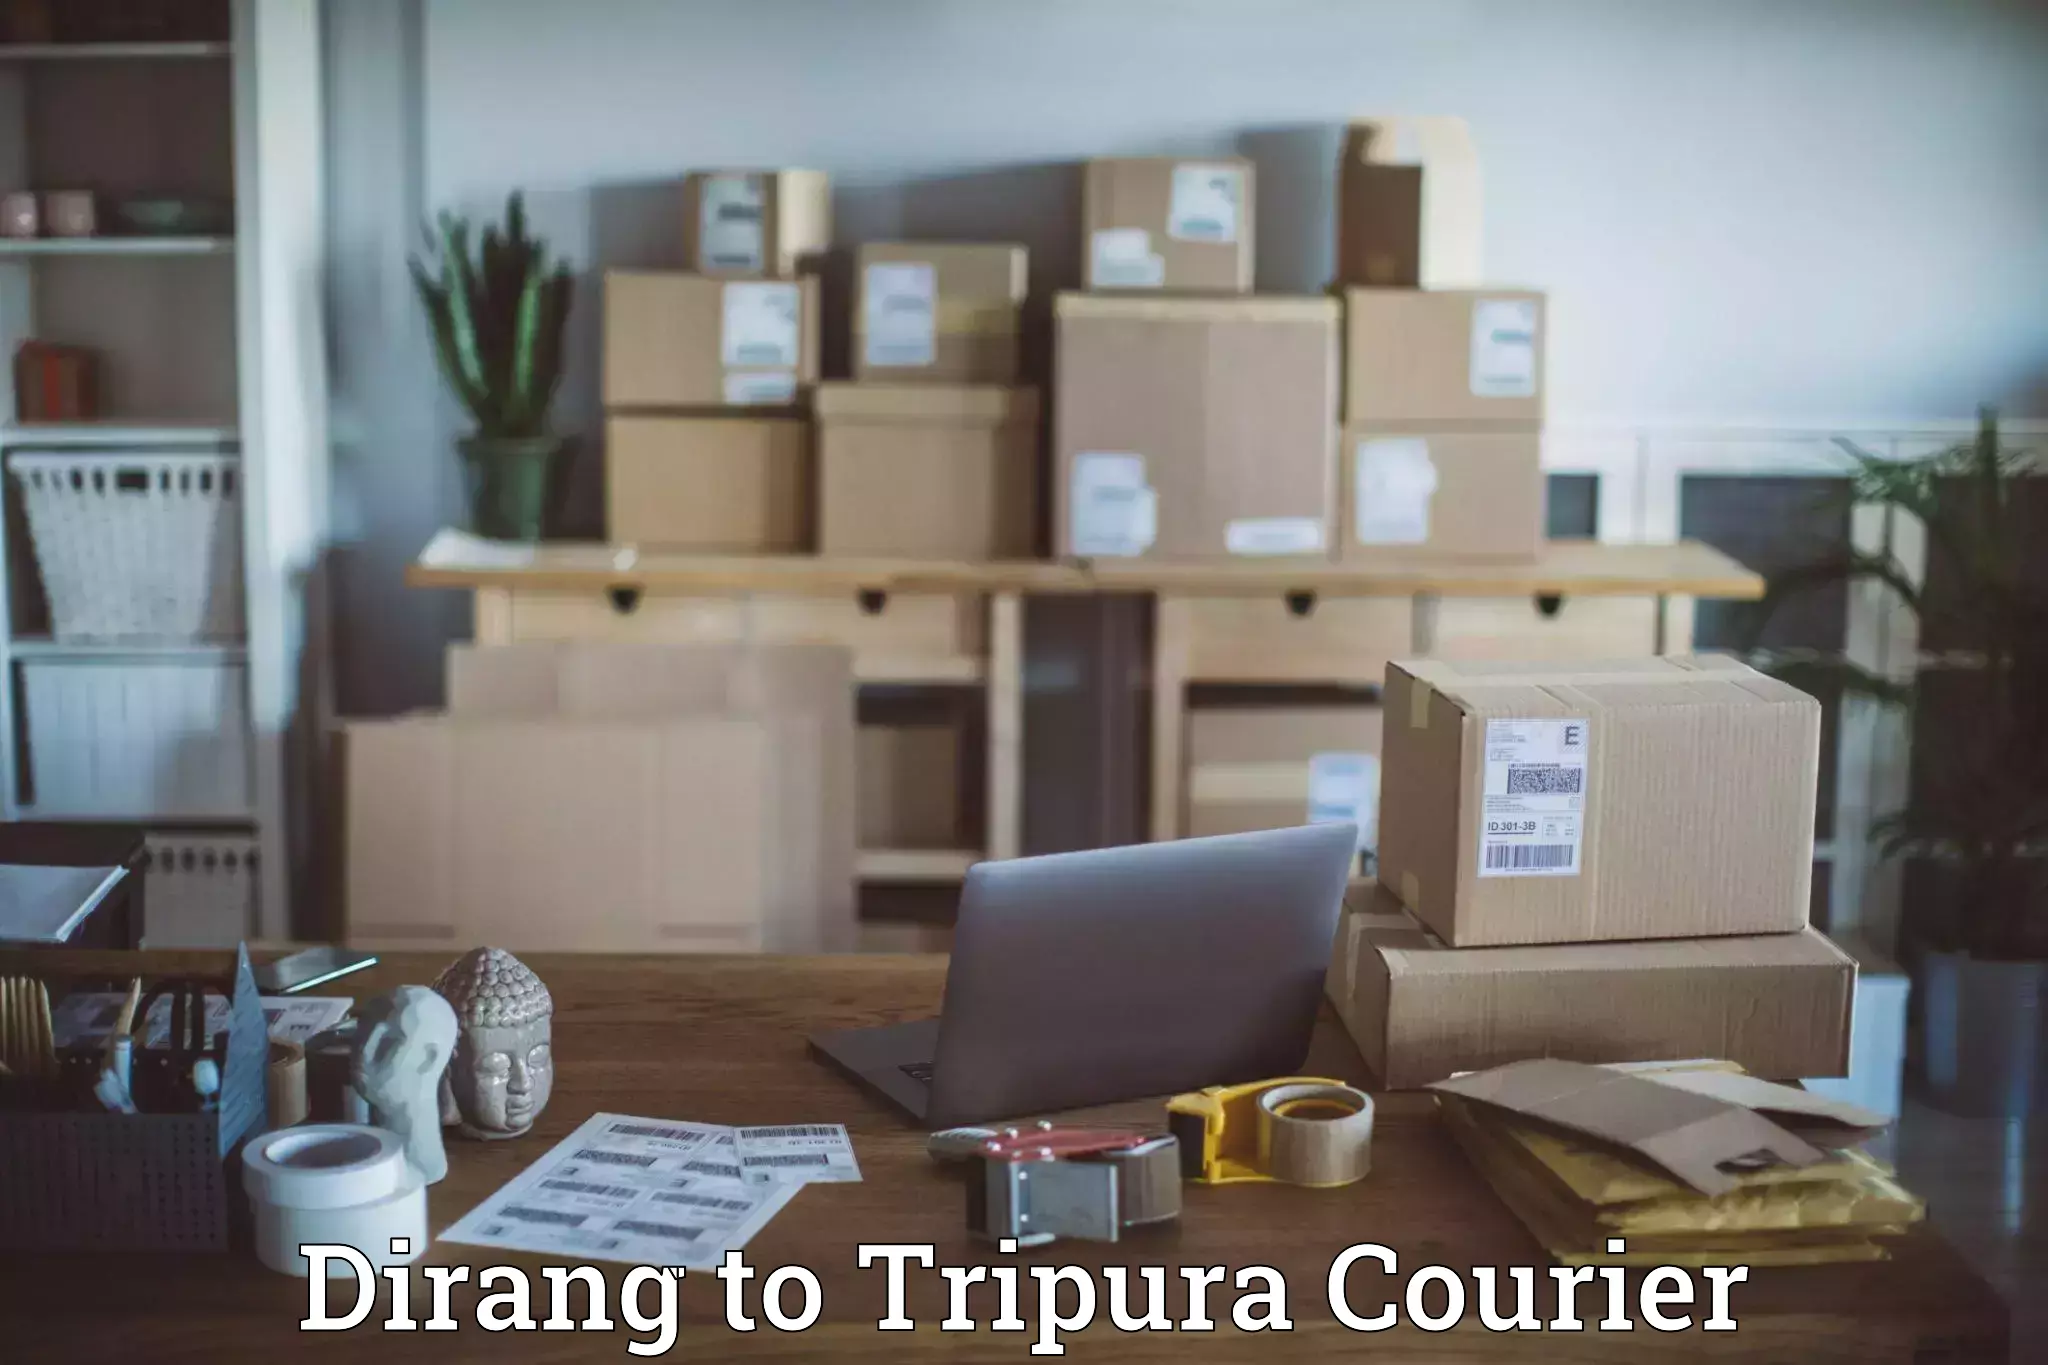 Cash on delivery service Dirang to Tripura